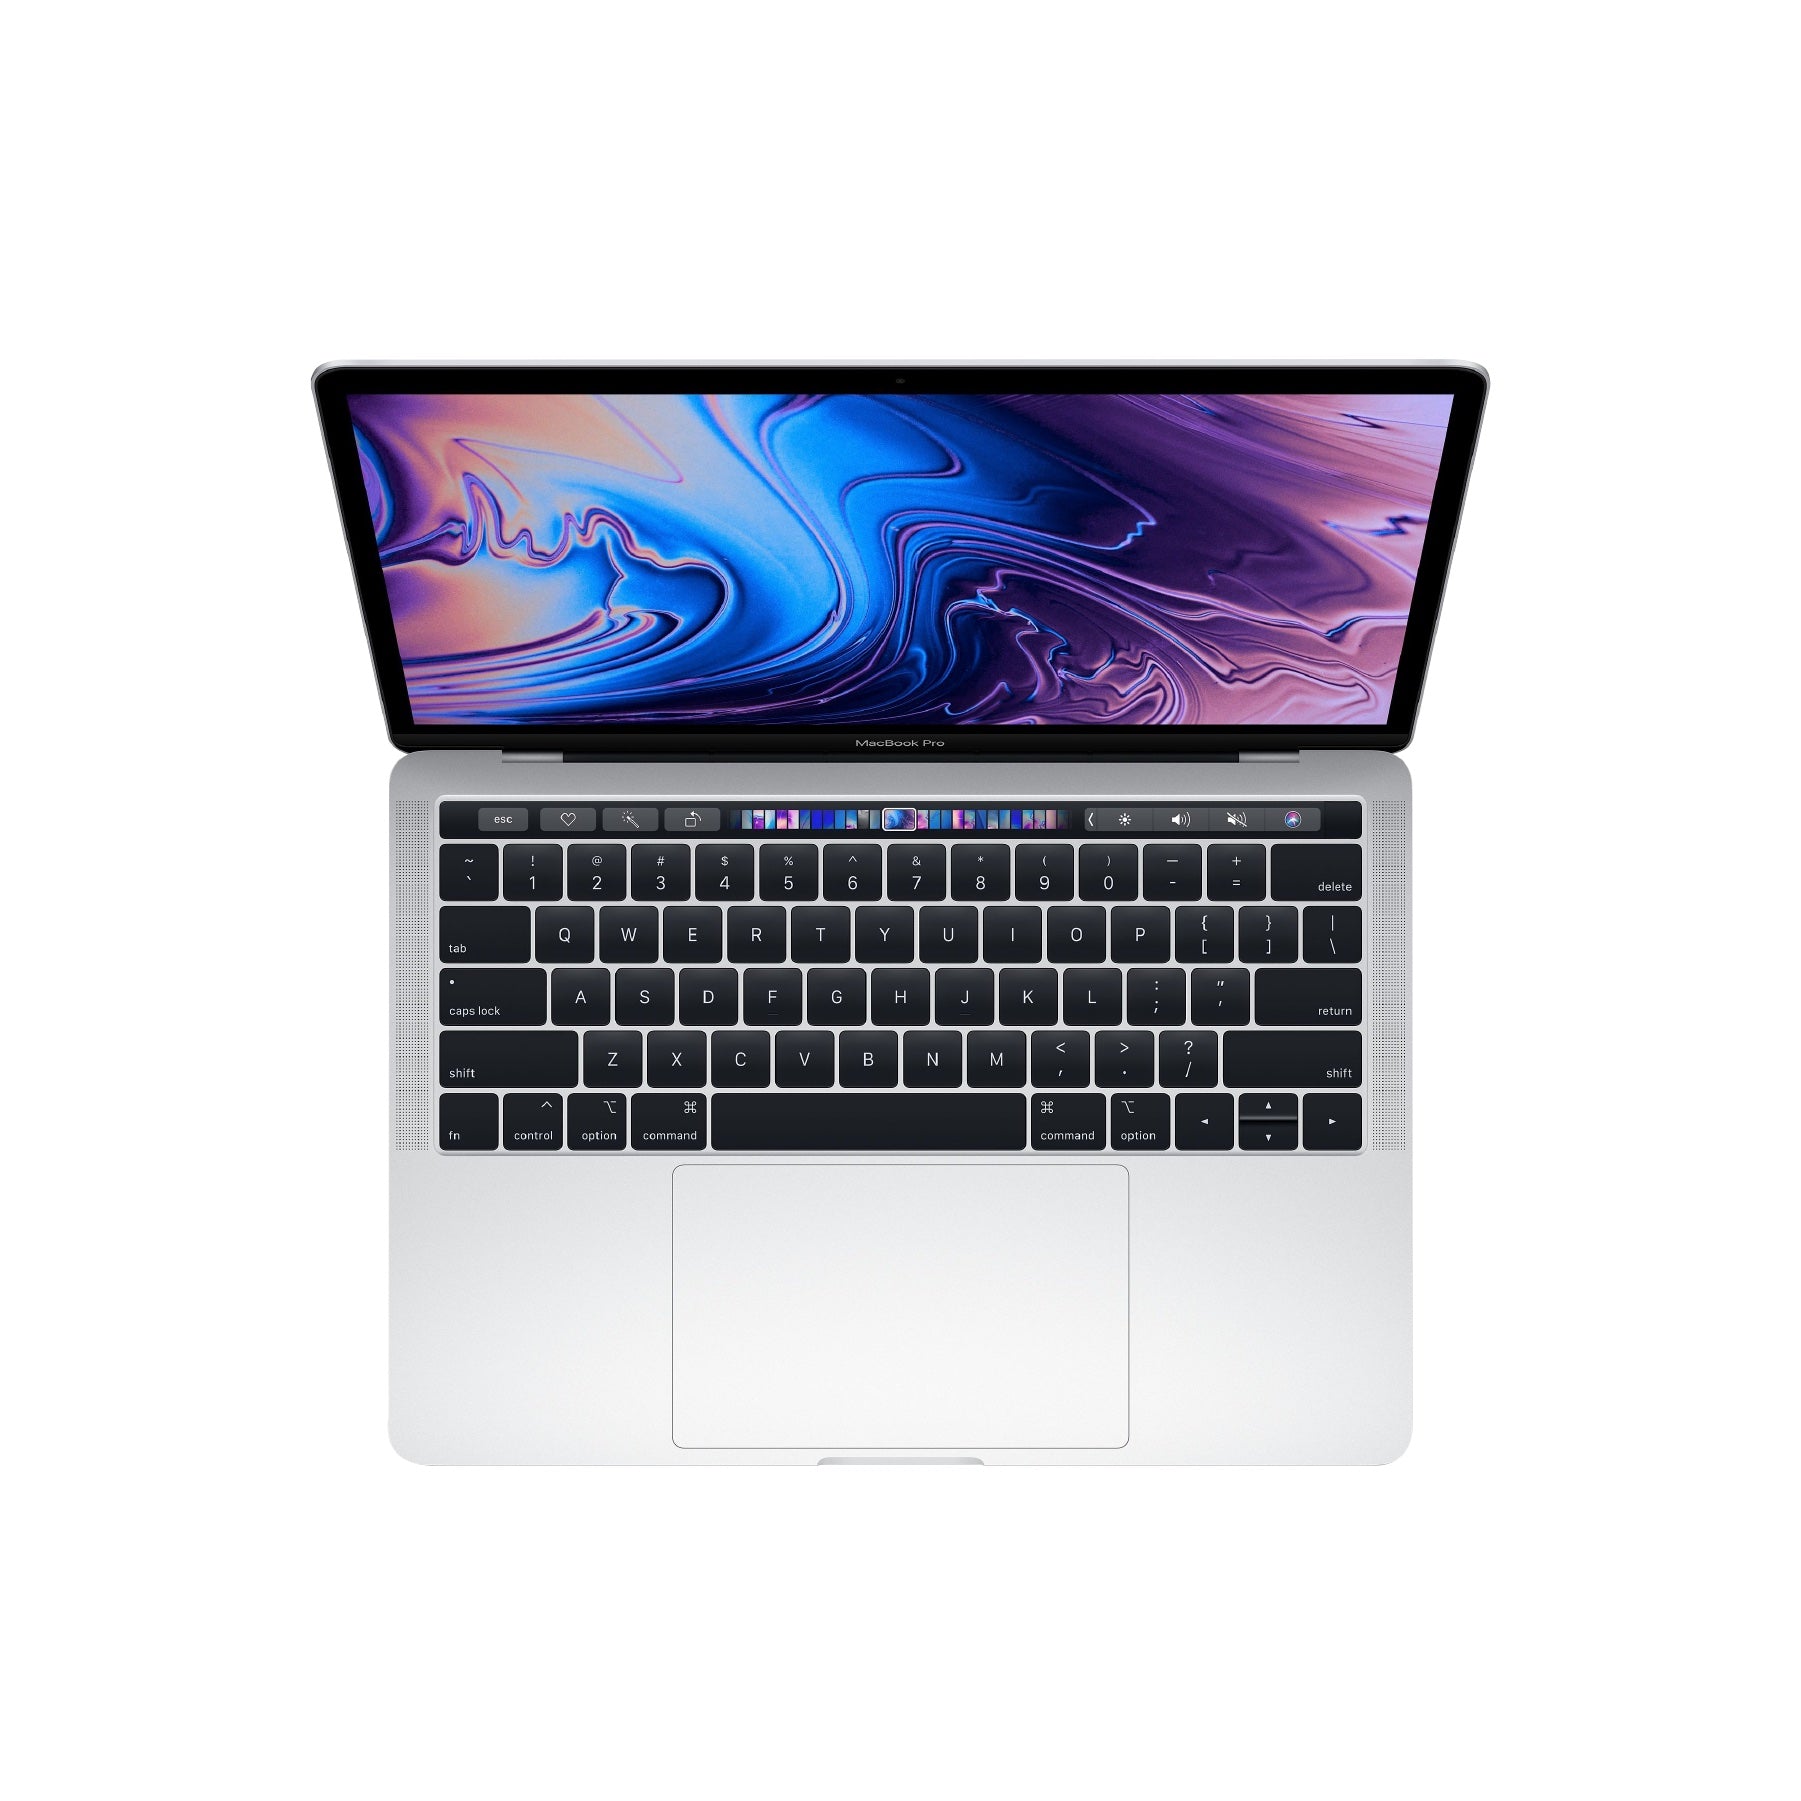 MacBook Pro (13-inch, 2020, Two Thunderbolt 3 ports) 1.4GHz, Intel Core i5 512GB - Silver (Good) - iStore Pre-owned